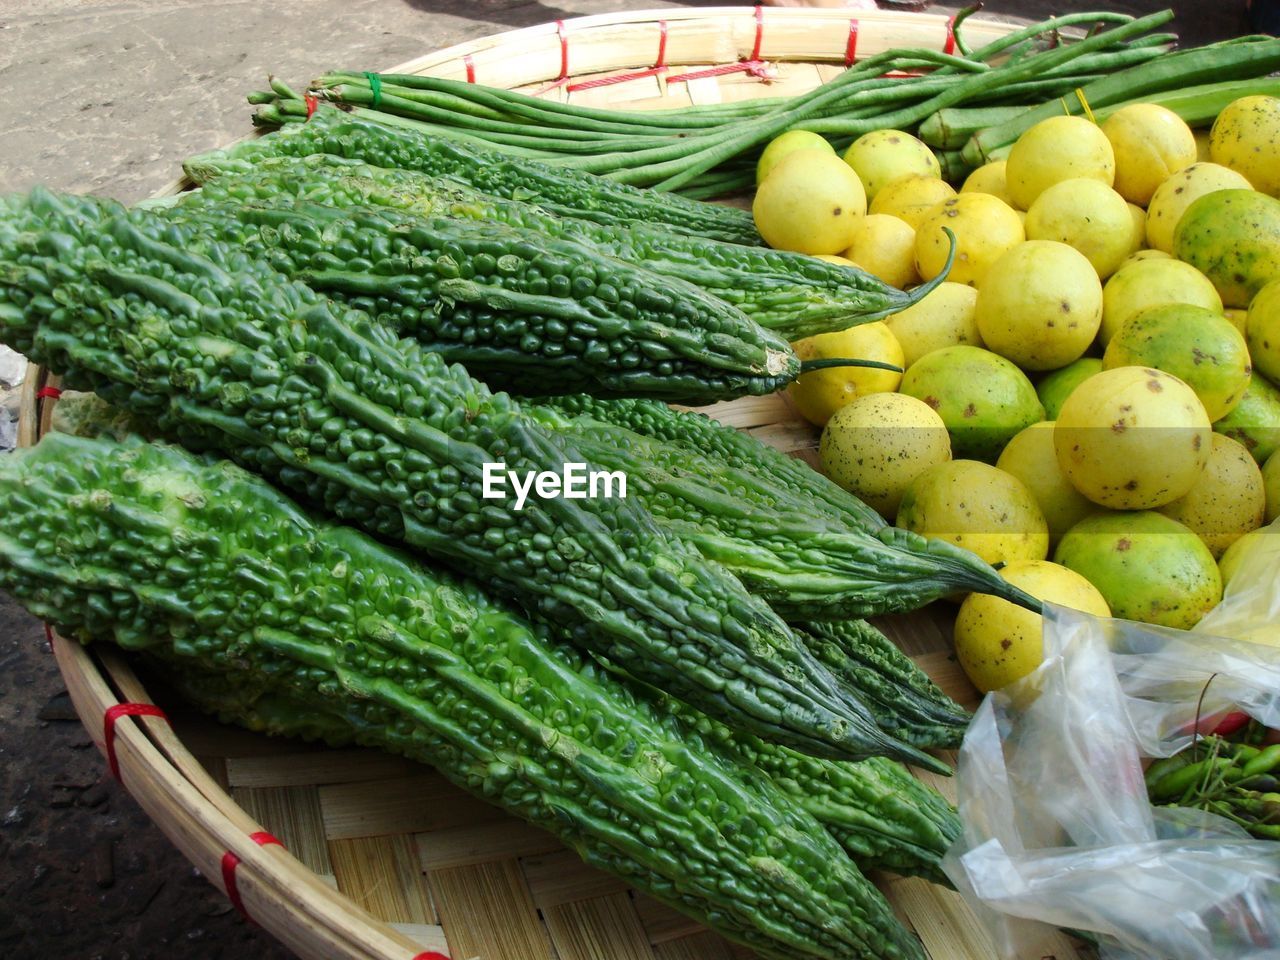 High angle view of vegetables for sale in wicker basket